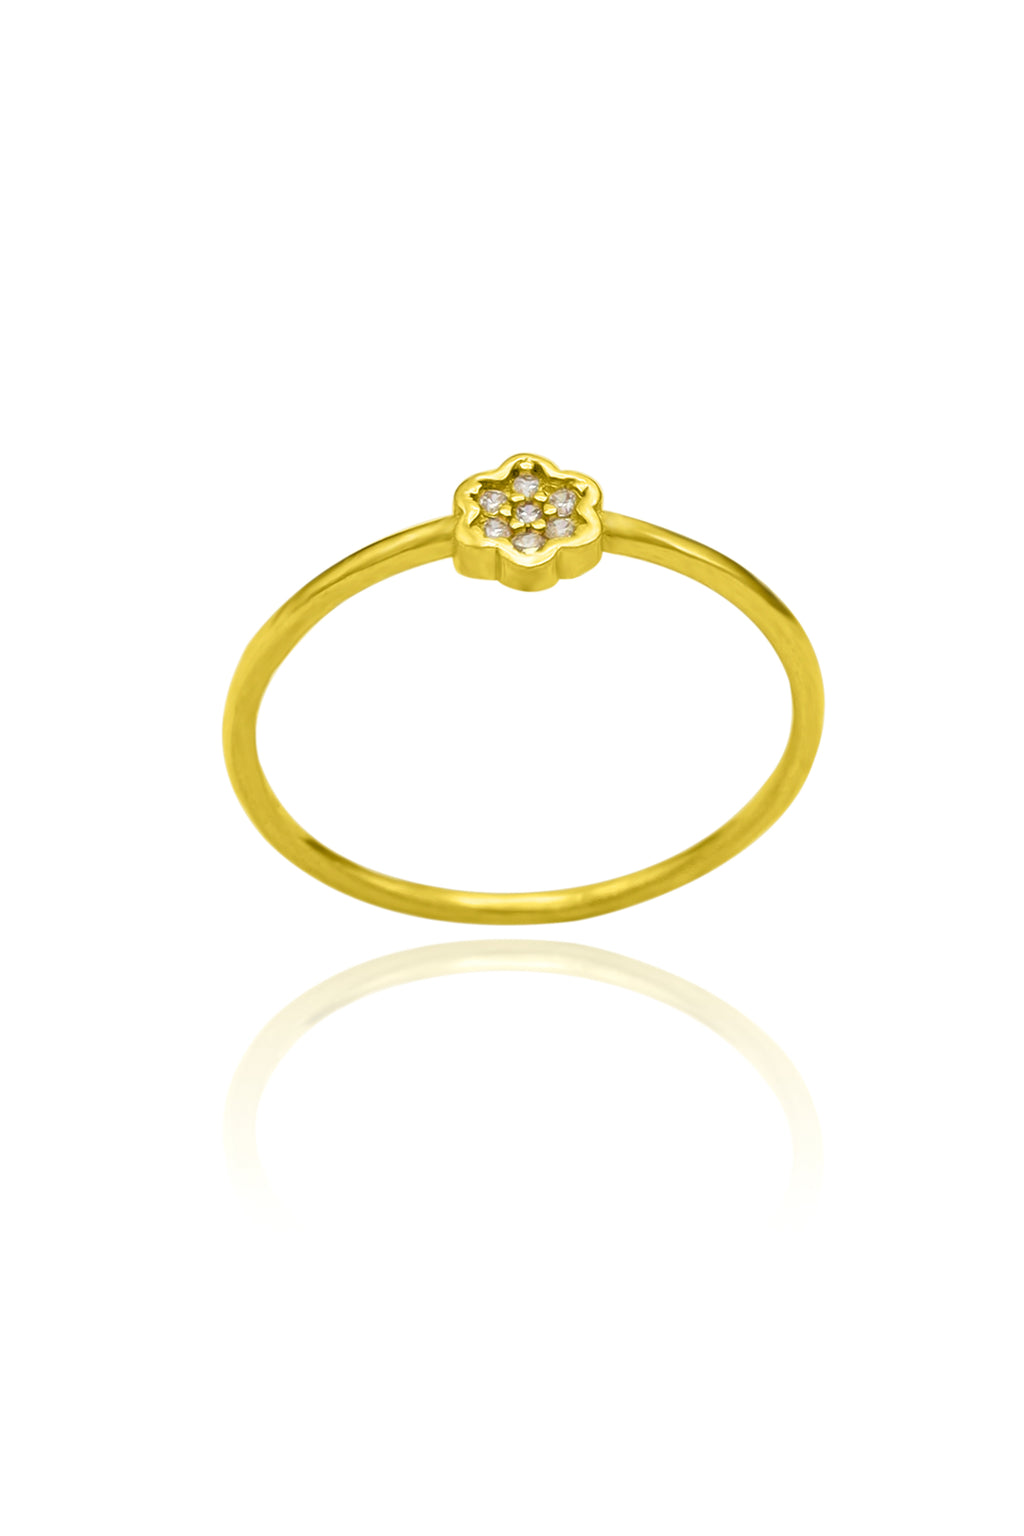 Floral Model Gold Plated Silver Ring With Zircon (NG201020545)